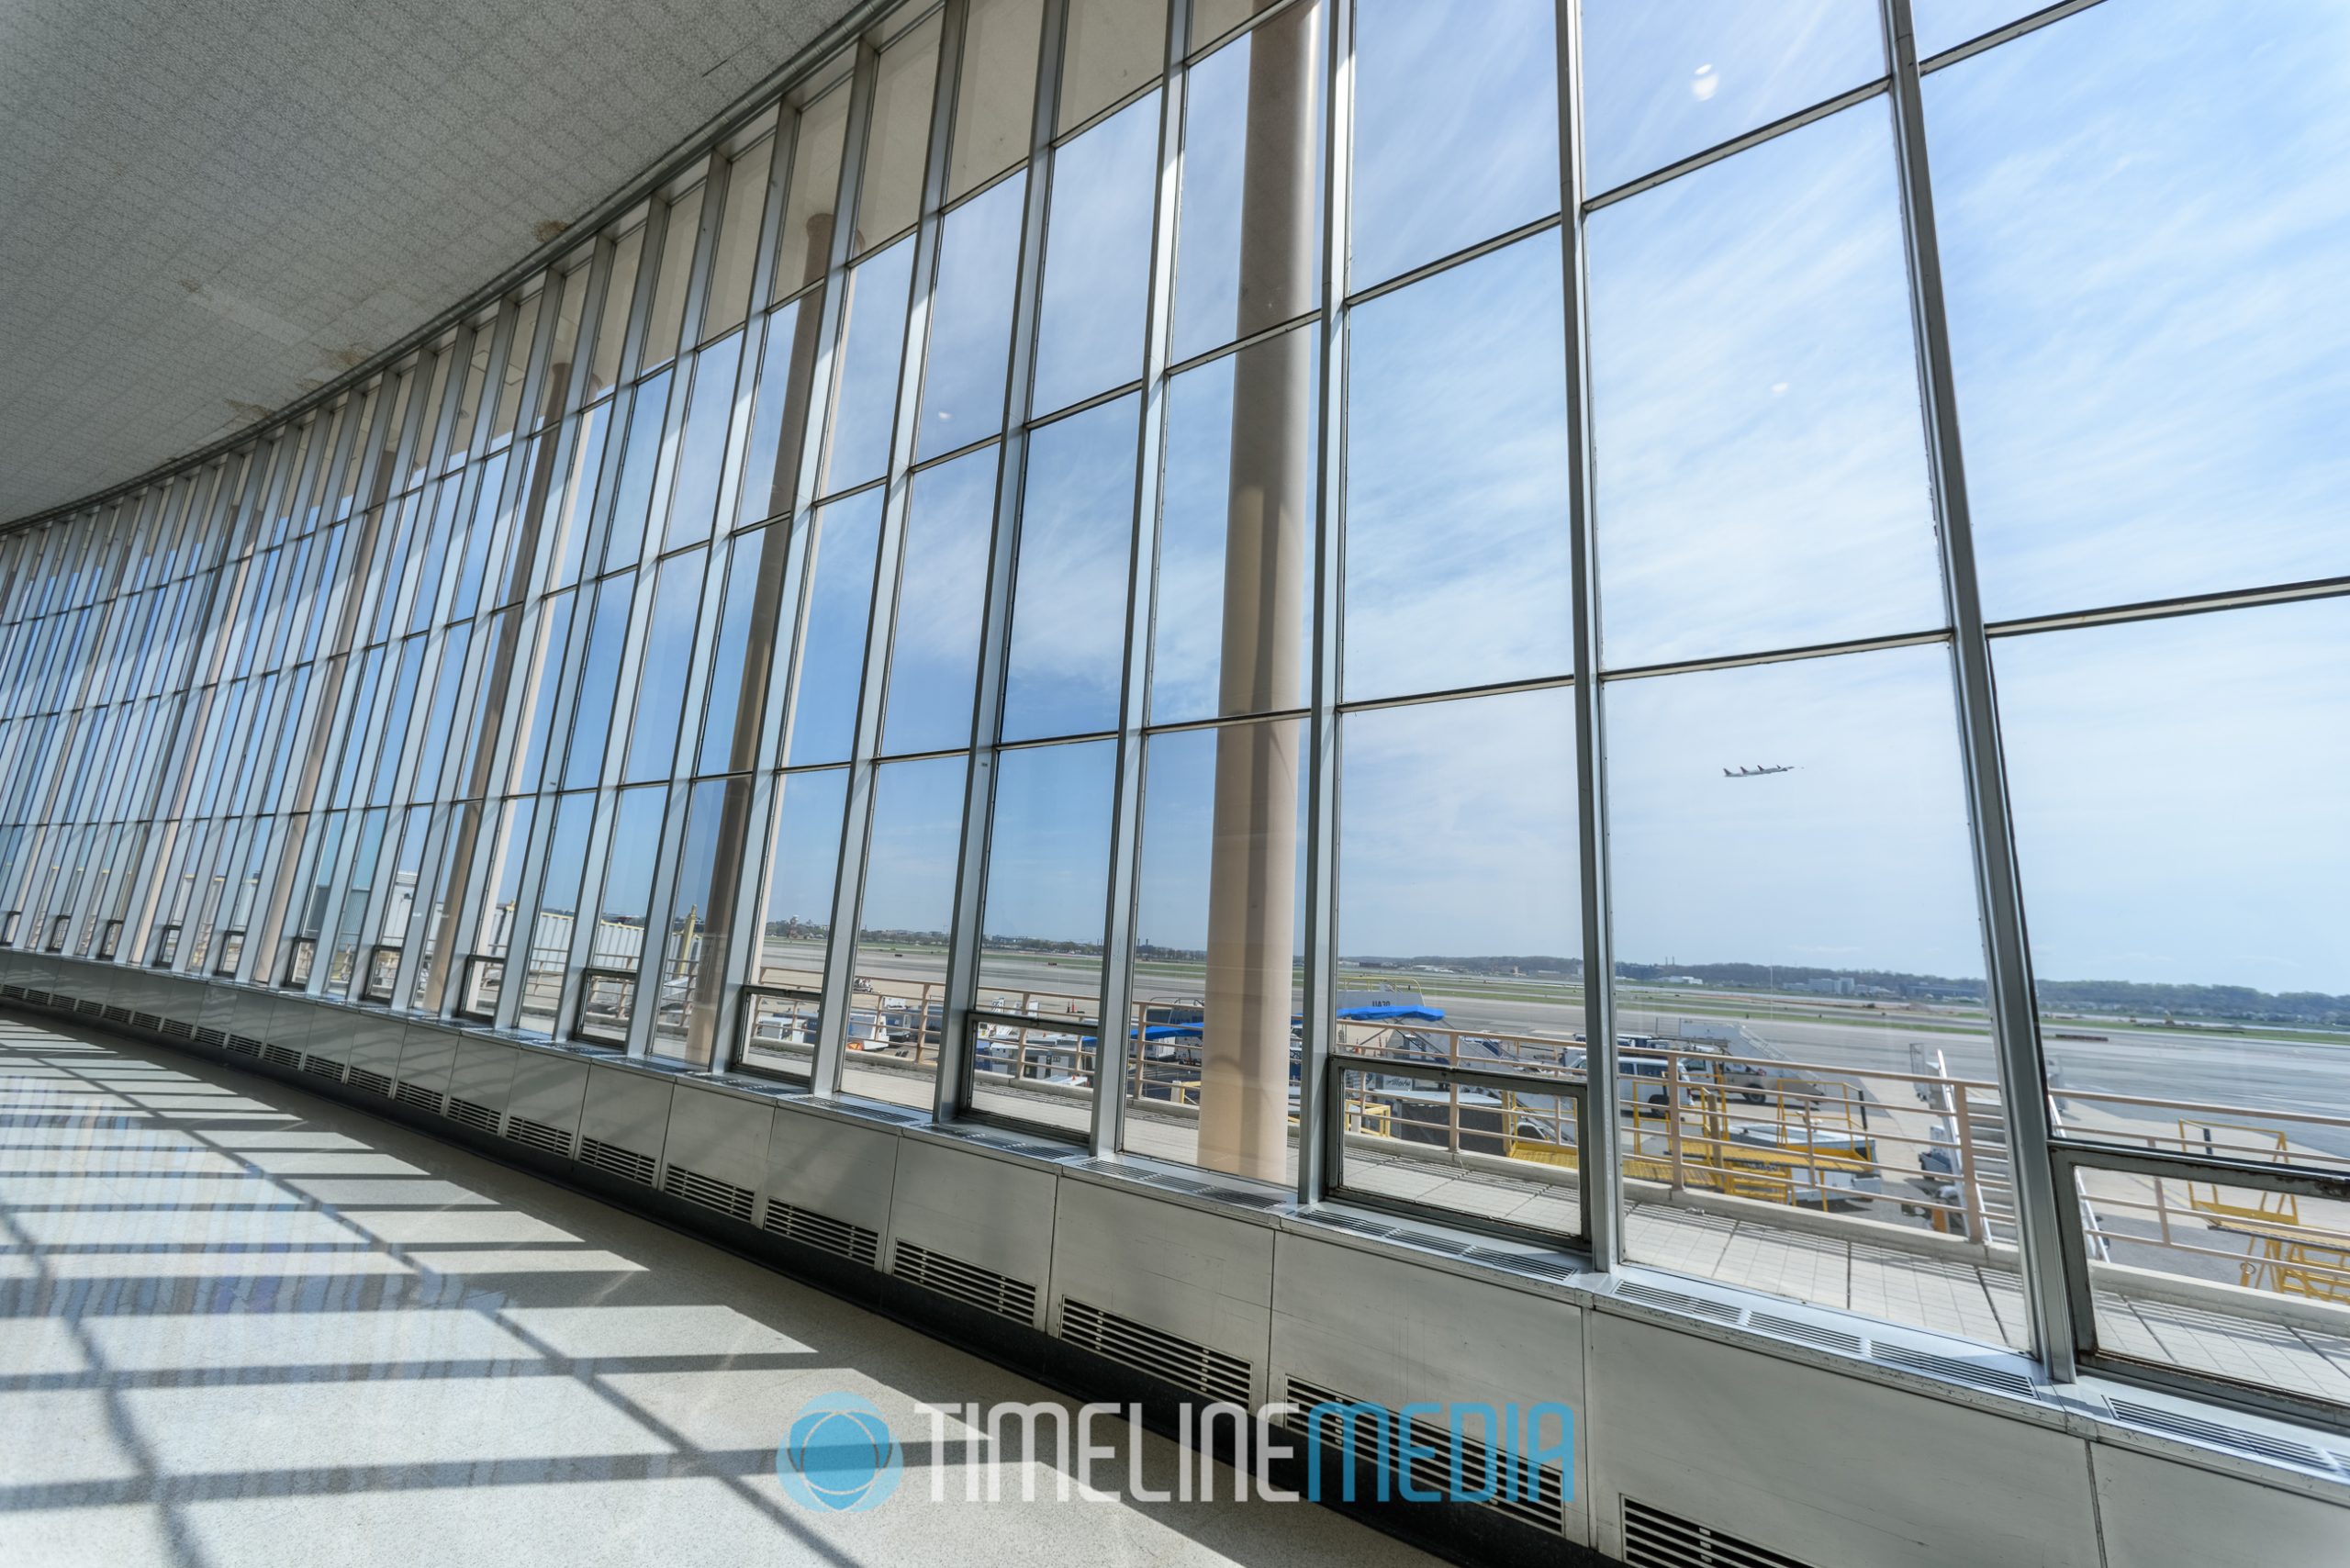 Reagan National Airport Terminal A ©TimeLine Media